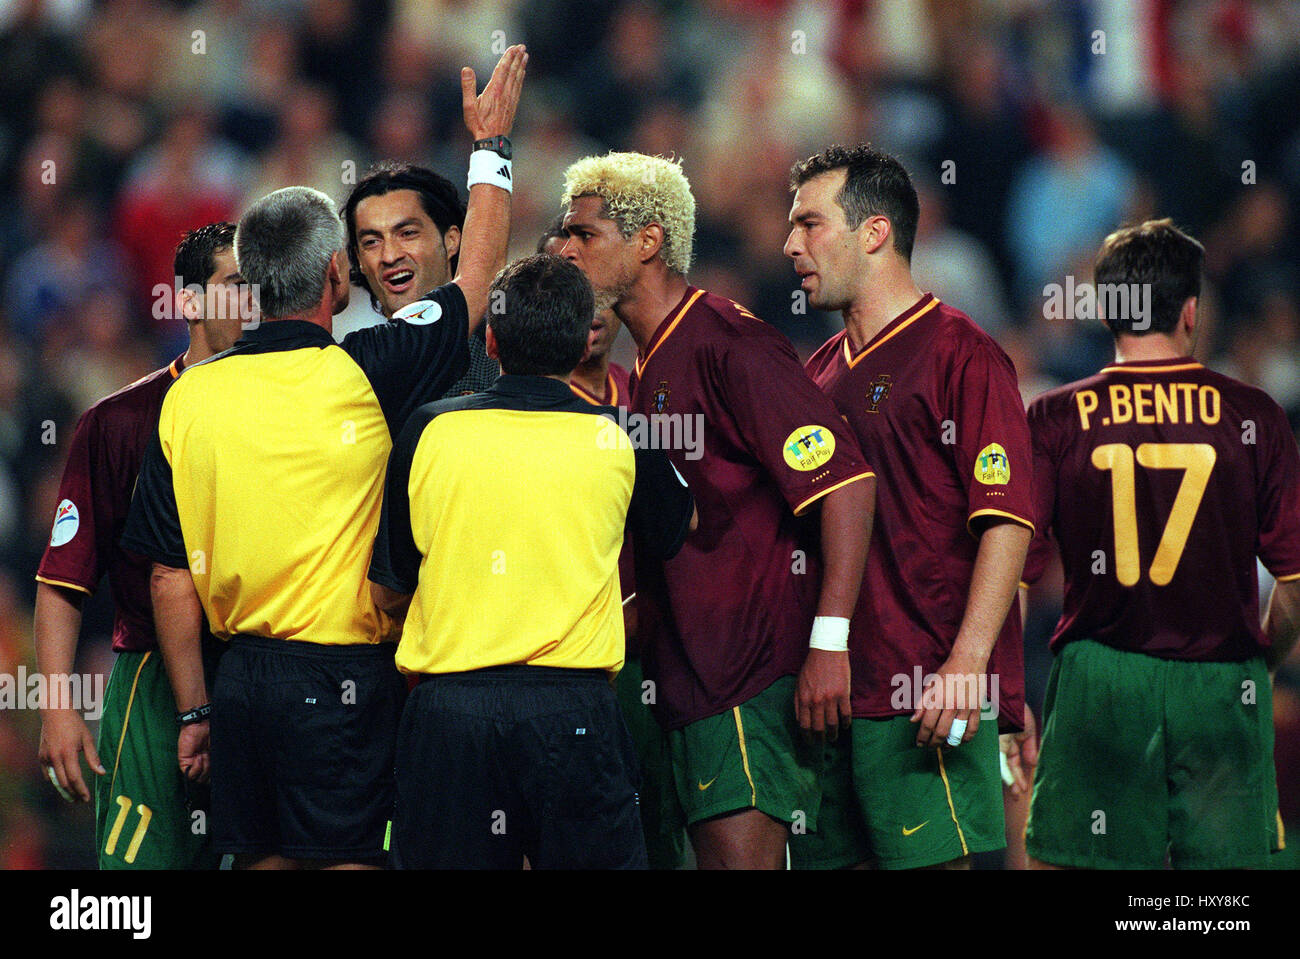 PLAYERS SURROUND REFEREE FRANCE V PORTUGAL BRUSSELS EURO 2000 28 June 2000 Stock Photo